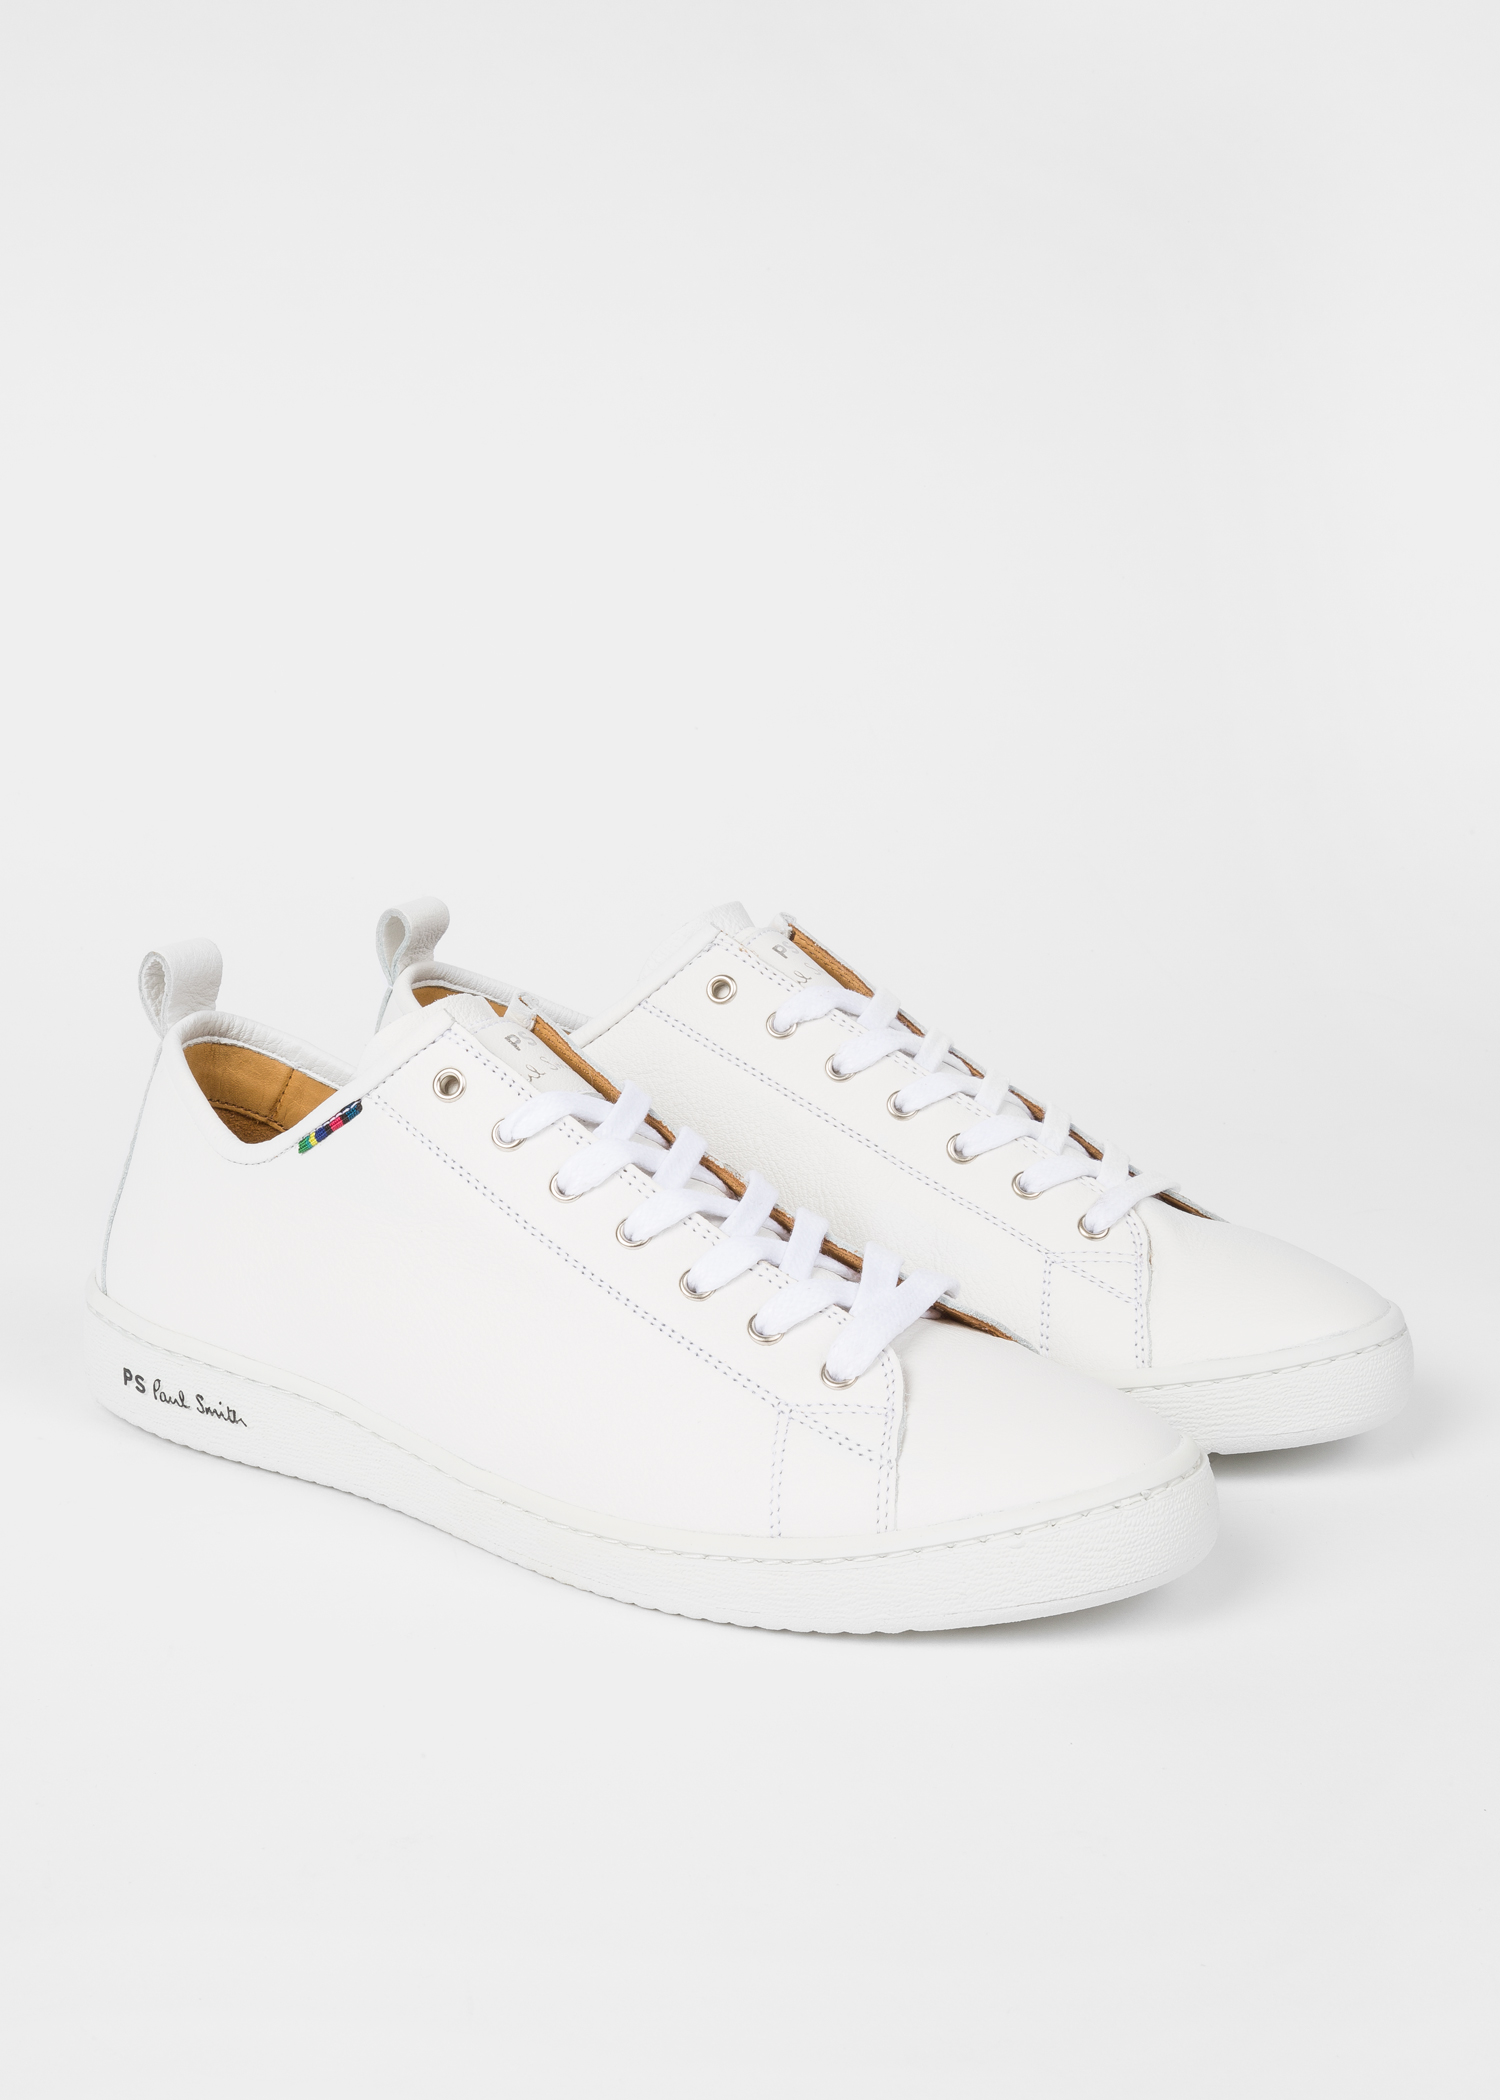 Men's White Calf Leather 'Miyata' Trainers by Paul Smith